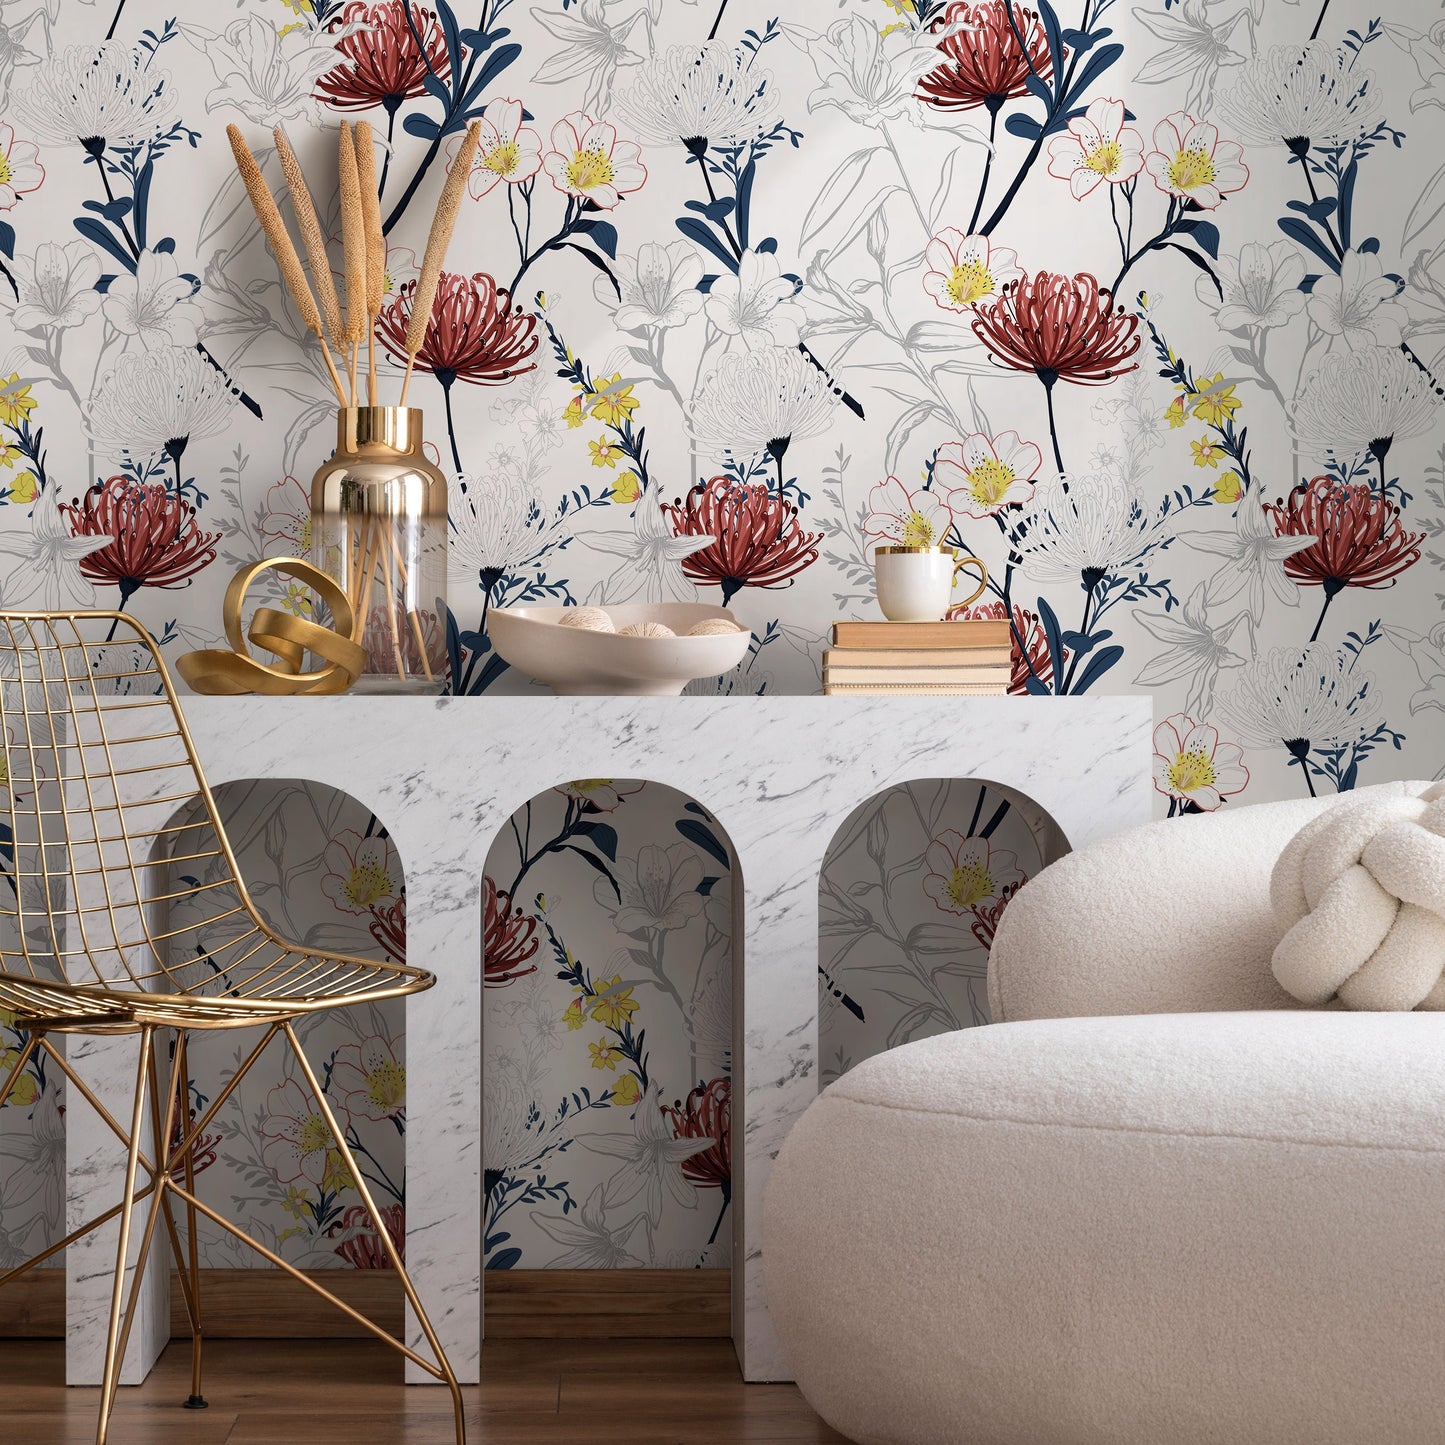 Outline Tropical Flowers Wallpaper - Removable Wallpaper Peel and Stick Wallpaper Wall Paper Wall Mural - B432